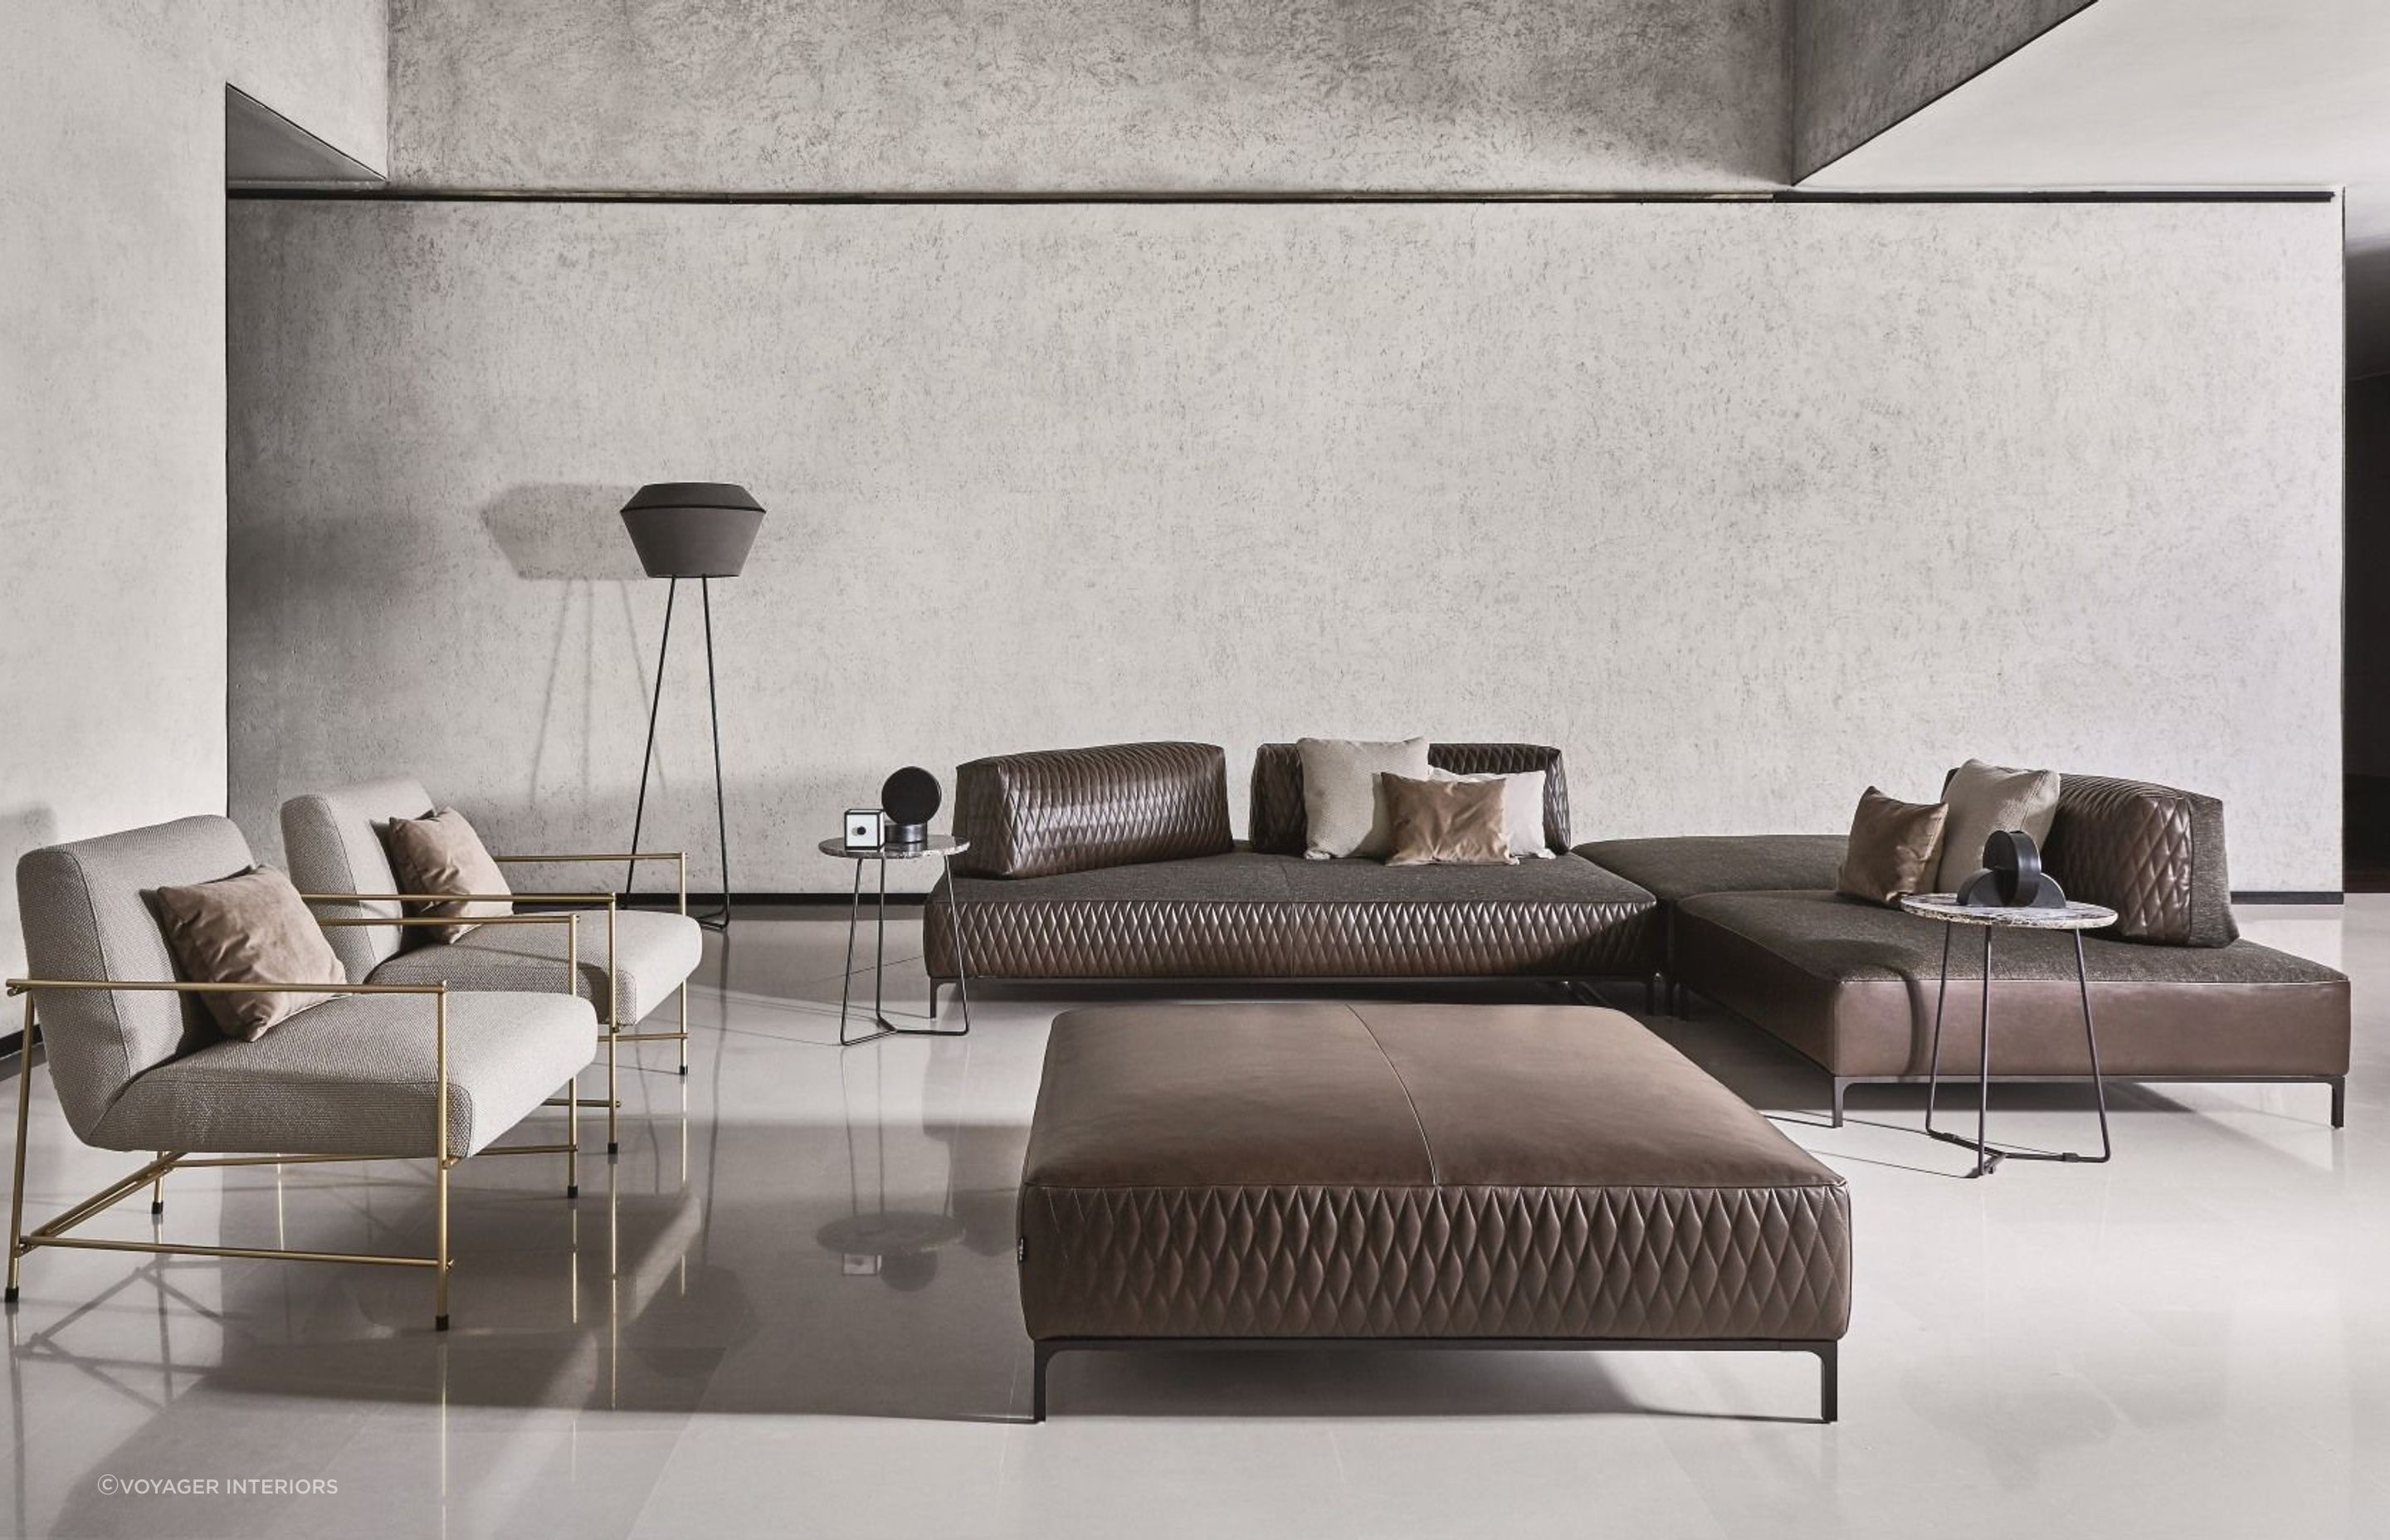 Furniture with clean lines and tighter fabrics like the Sanders Air Sofa perfectly encapsulate minimalist styling